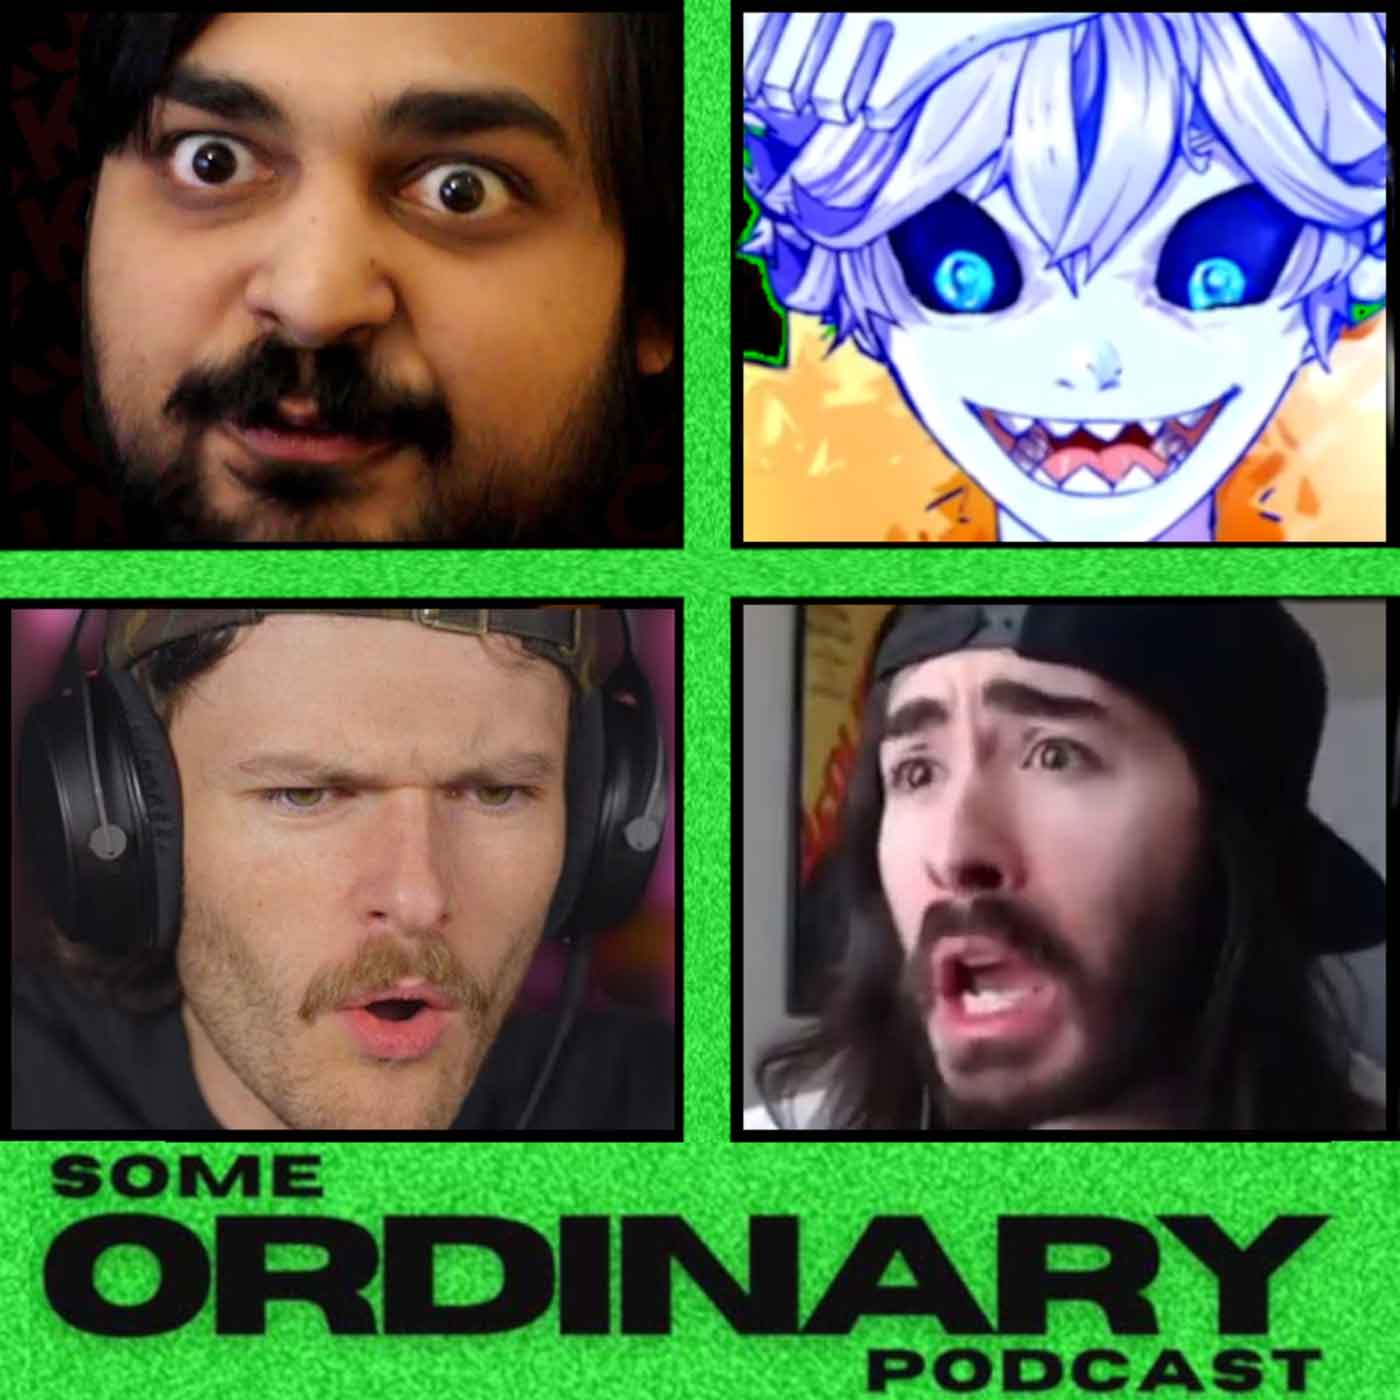 Moist Cr1TiKaL Enters The Chat | Some Ordinary Podcast #1